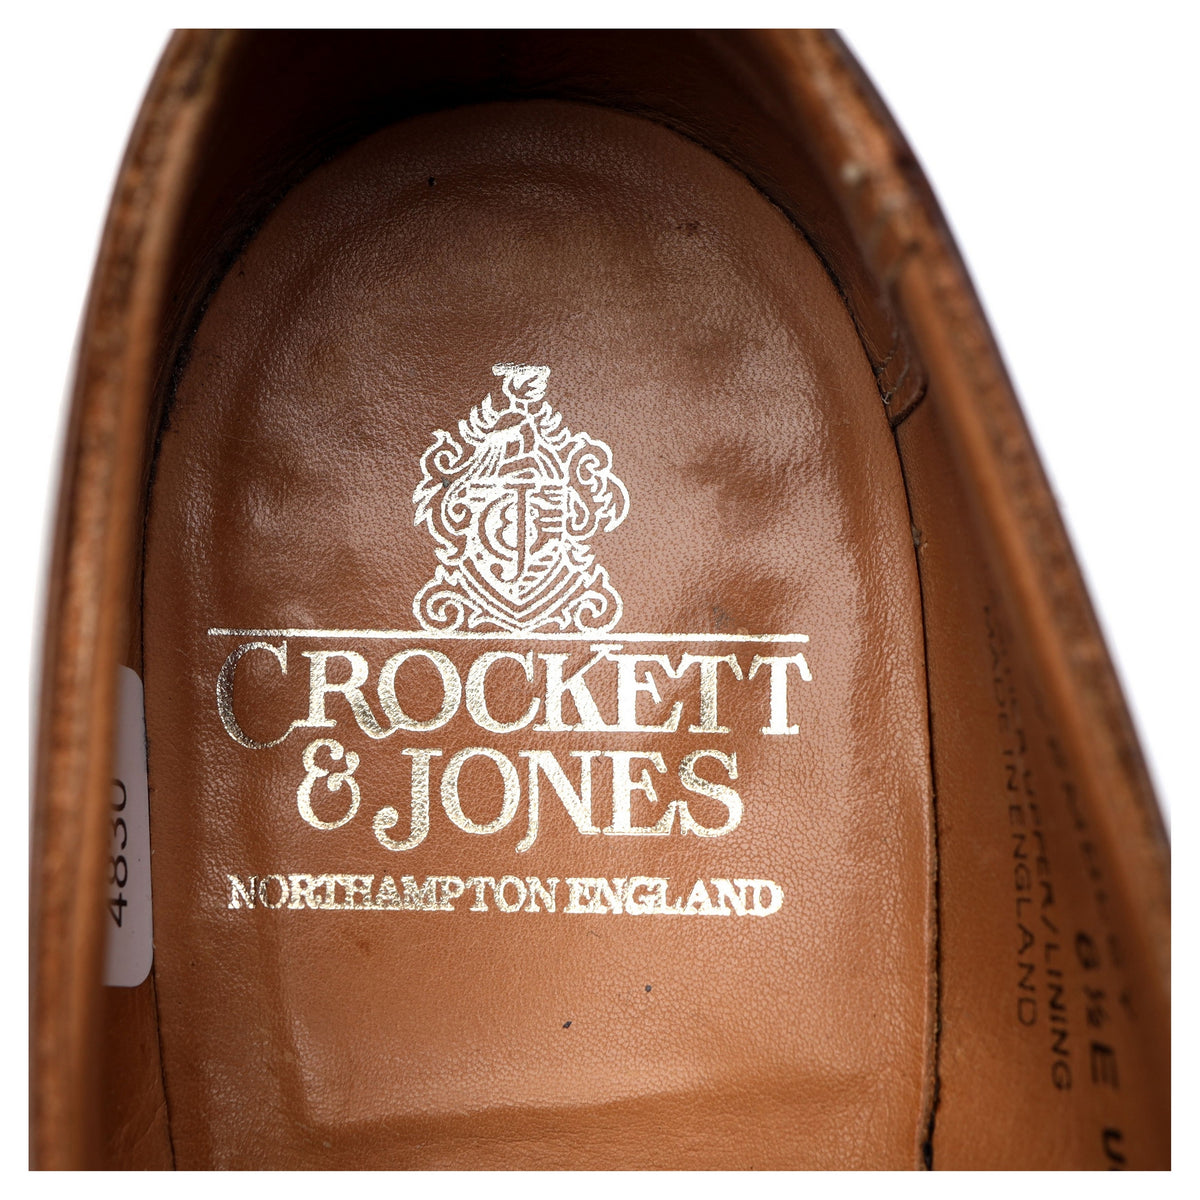 &#39;Wembley&#39; Brown Leather Oxford UK 6.5 E